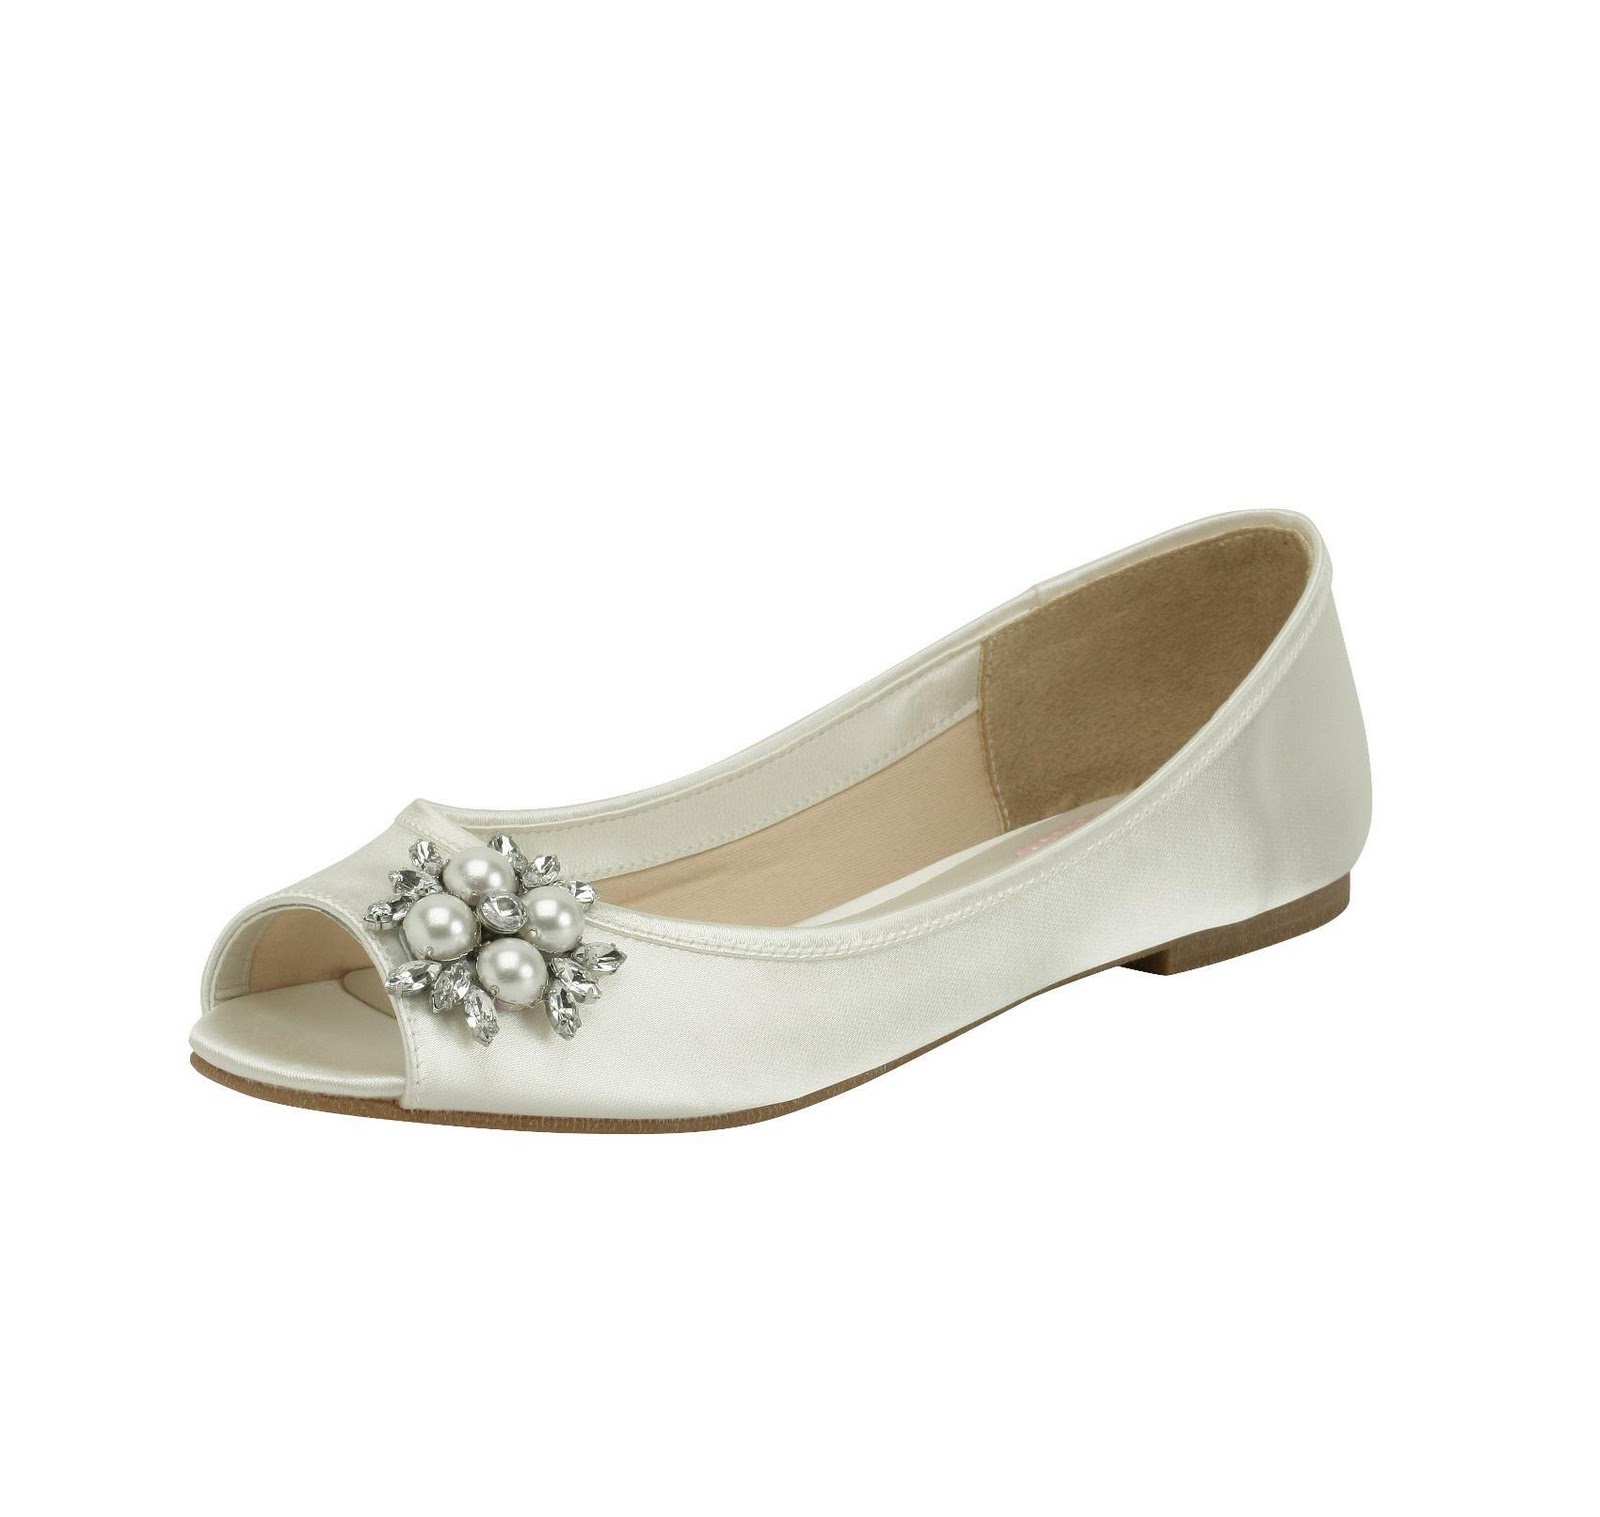 Paradox Pink Flower Ivory Wedding Shoes. Hover over image to zoom